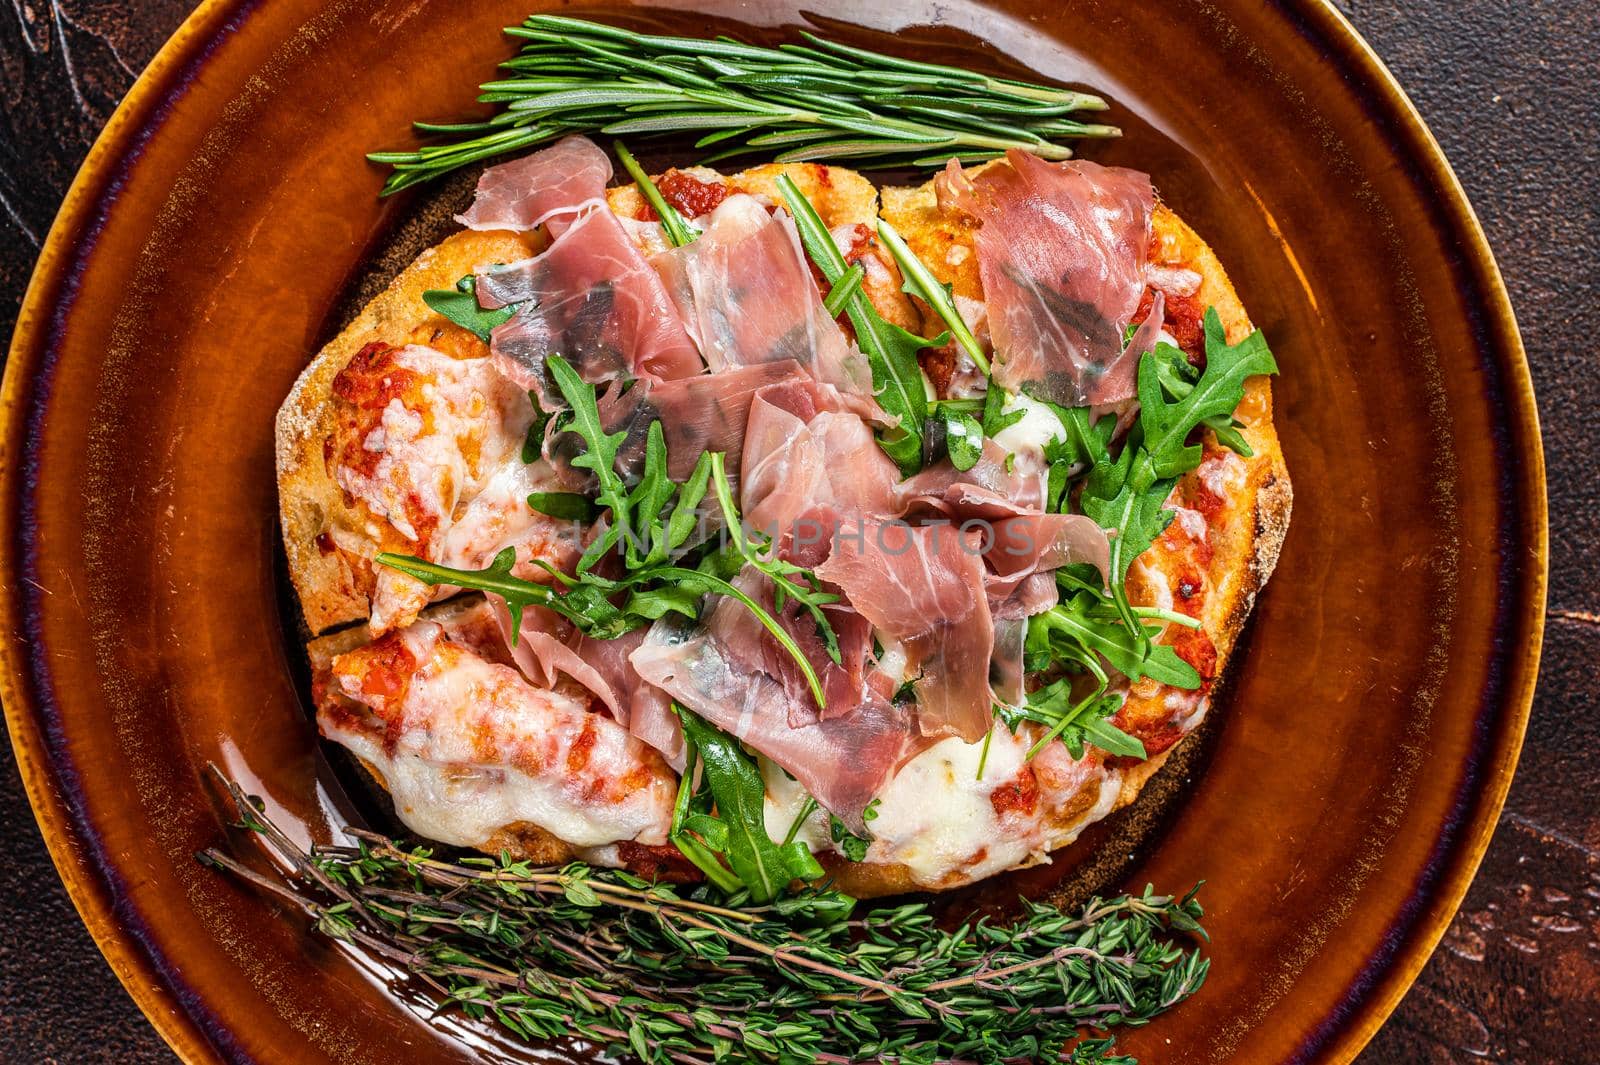 Pizza with prosciutto parma ham, arugula salad and parmesan cheese in a rustic plate. wooden background. Top view.